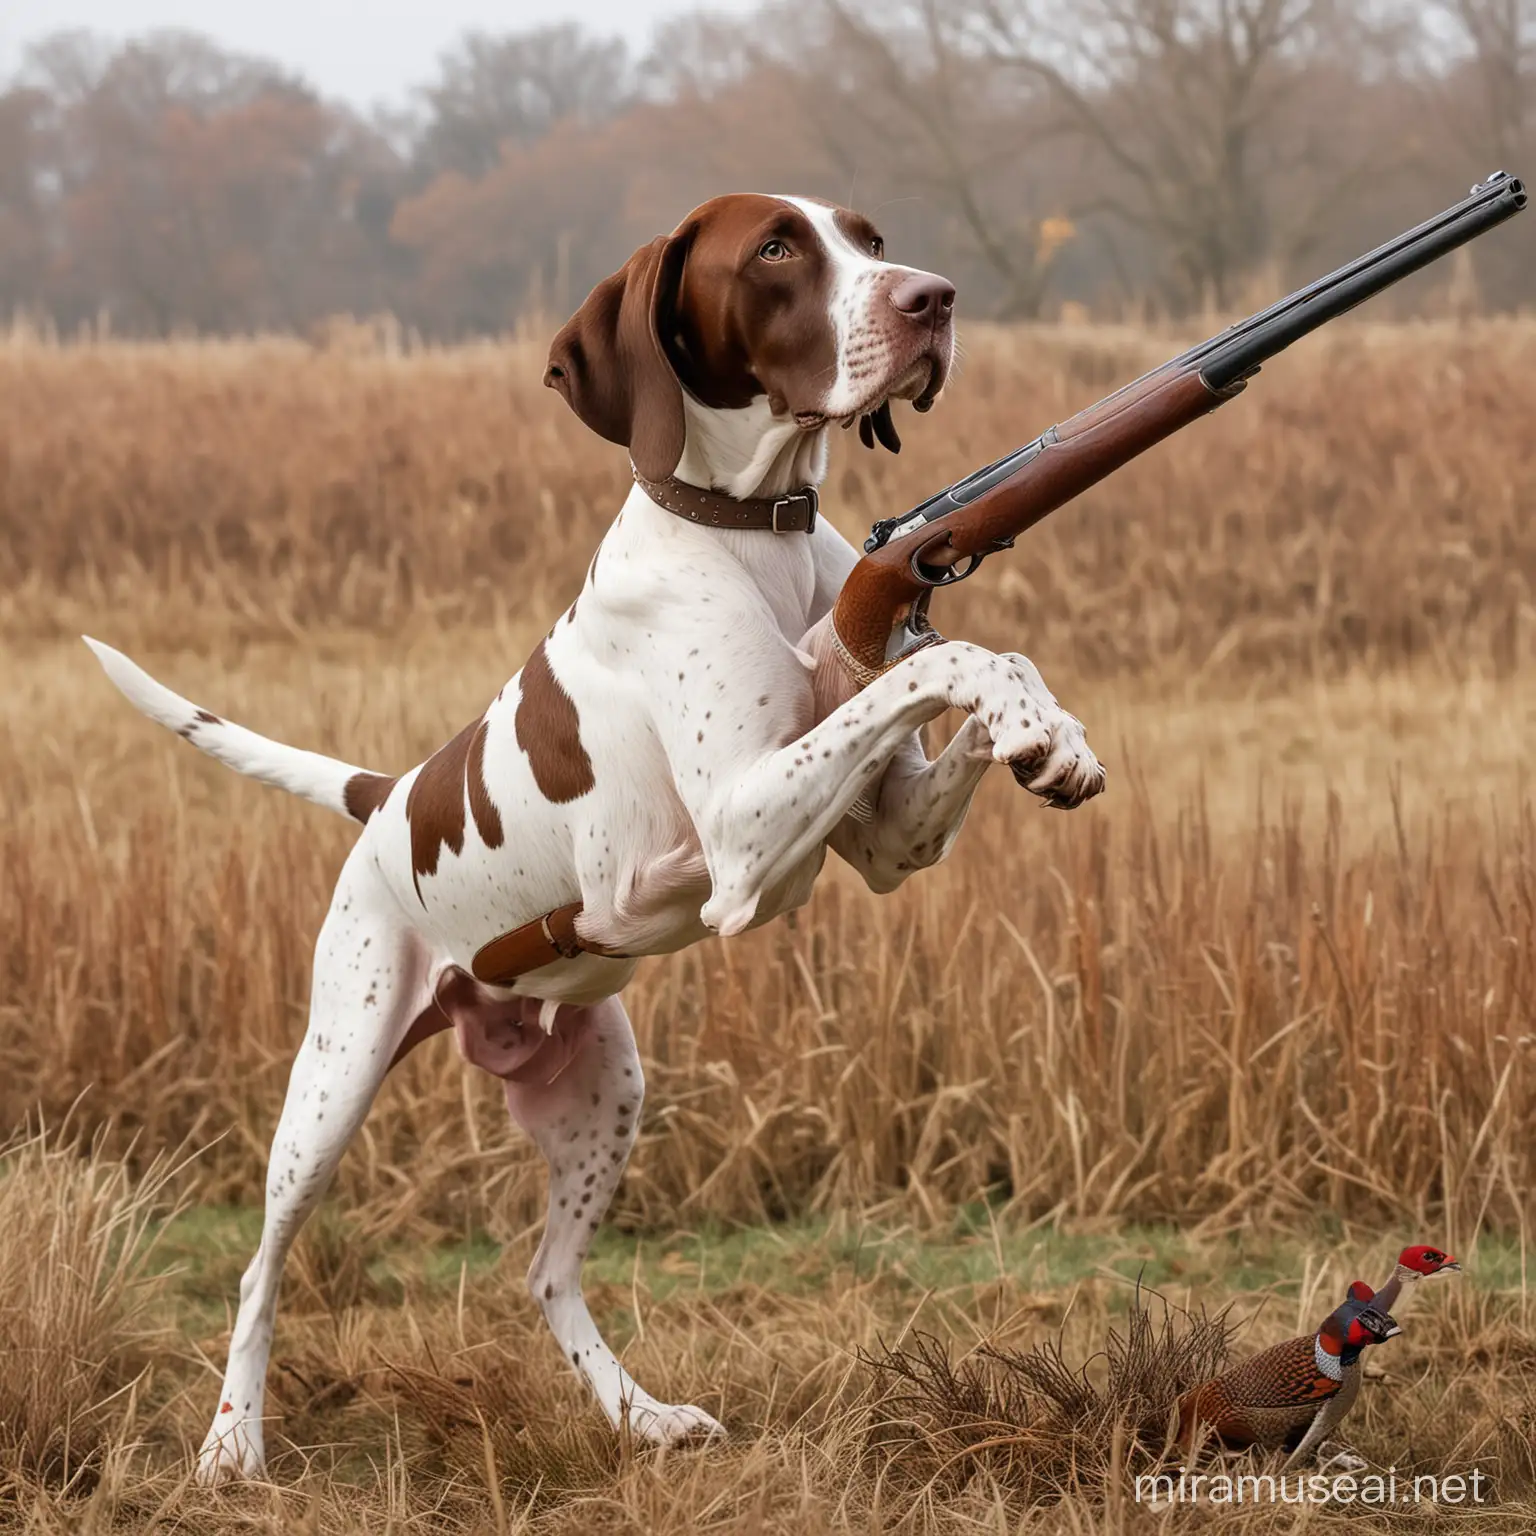 an English Pointer, the dog is in a classic hunting stance pointing towards prey, side view, a pheasant is holding a long gun